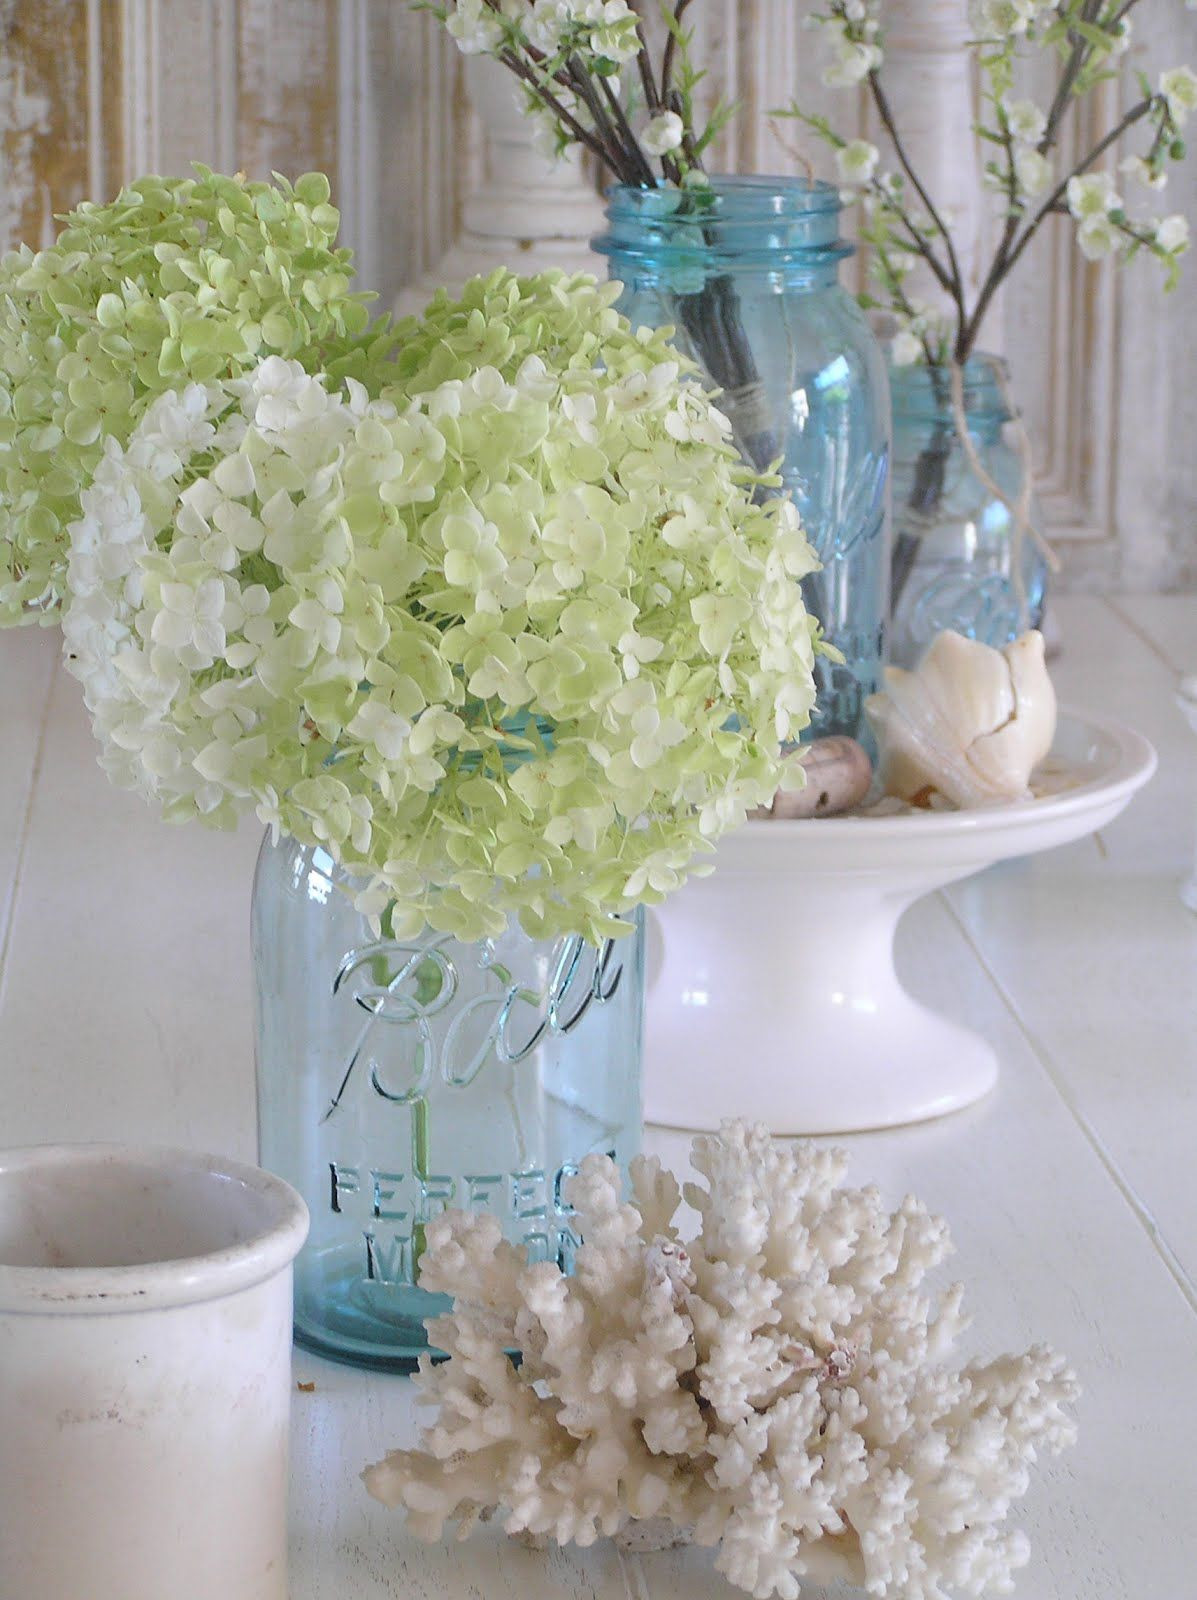 white mason jar vase of hydrangeas in mason jar with coral nautical accents or starfish for within hydrangeas in mason jar with coral nautical accents or starfish for dacor we could use pink white and blue hydrangeas